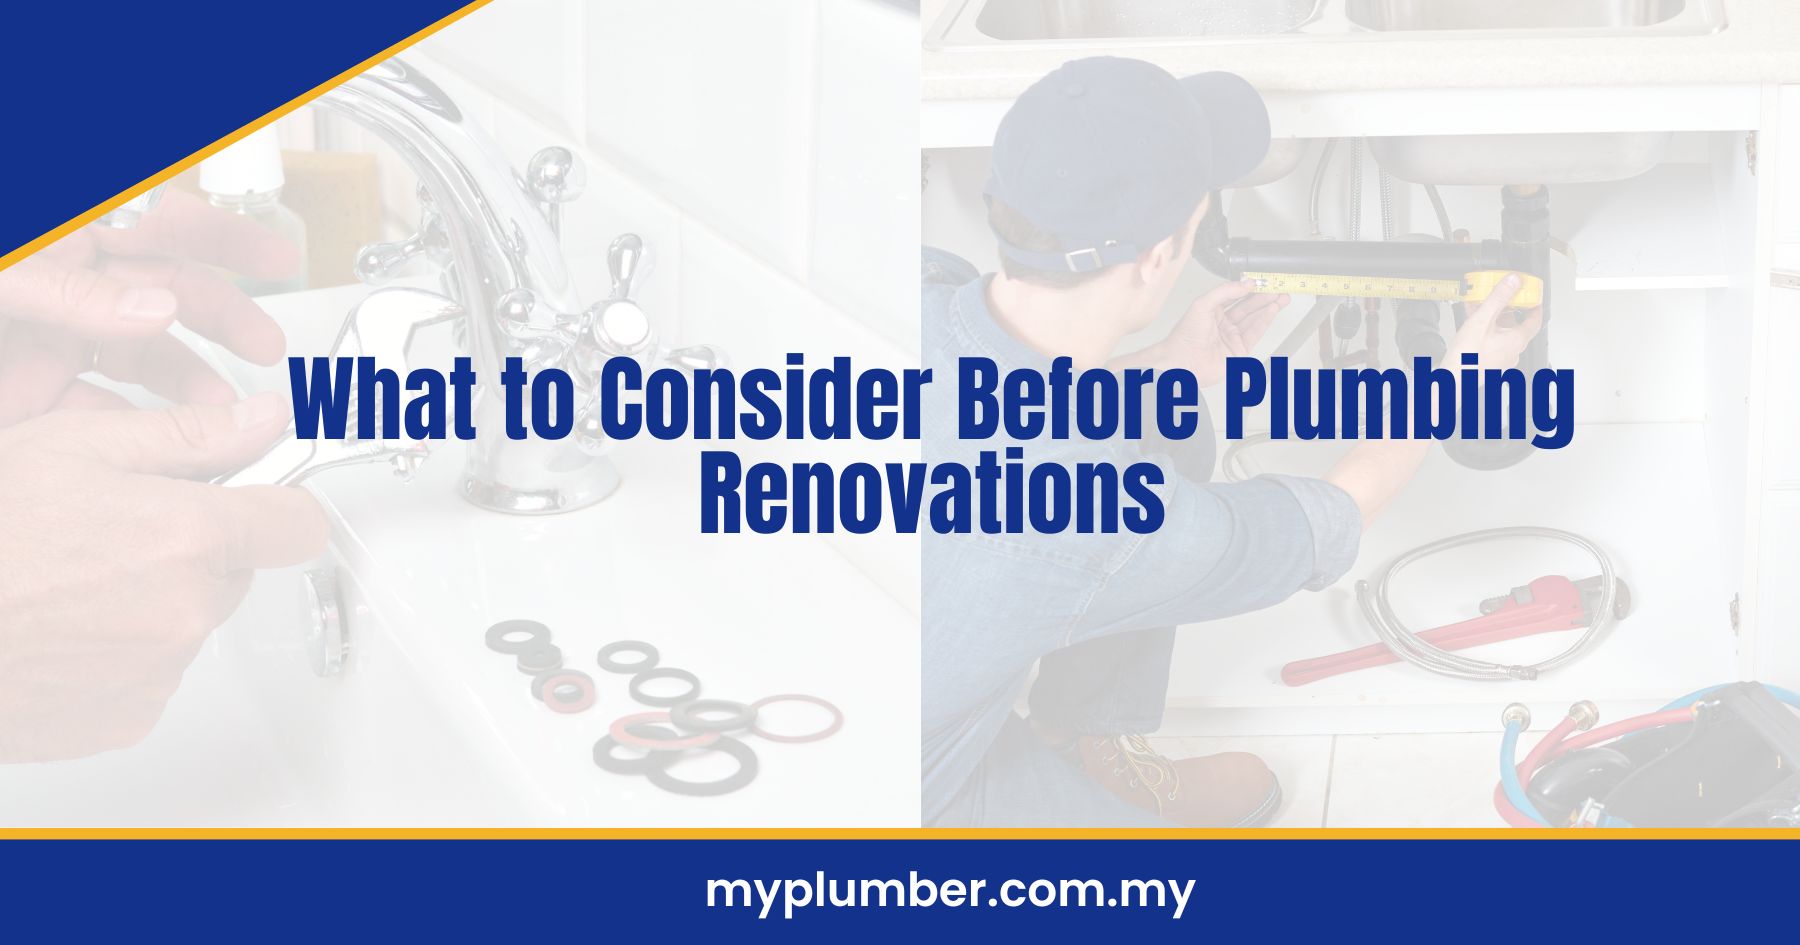 What to Consider Before Plumbing Renovations